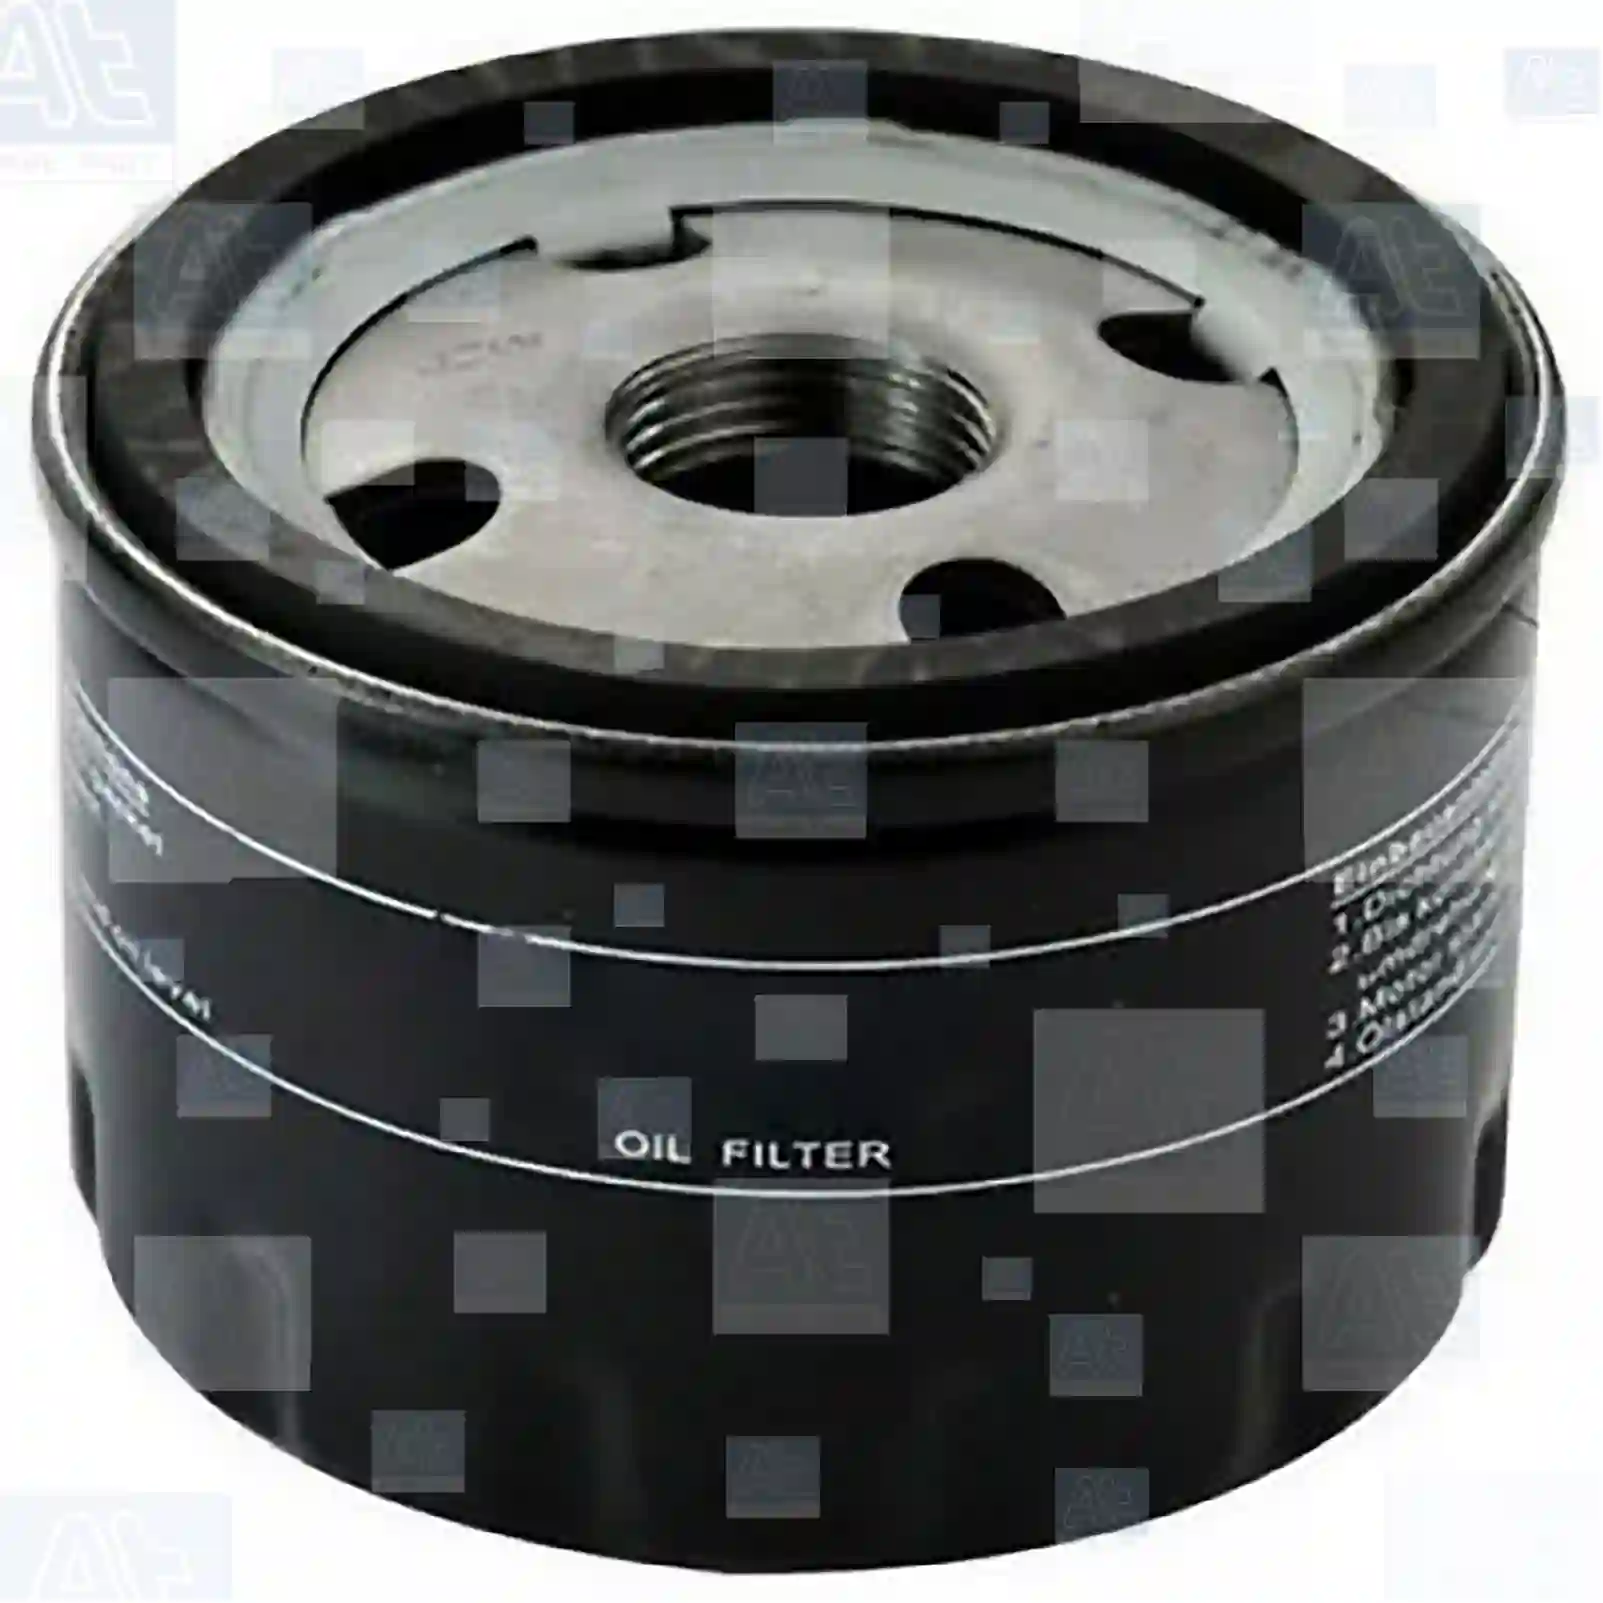 Oil filter, 77700227, 01FBO042, X106, X108, X557, X569, X571, X601, X618, X623, 73500506, 8933004195, 00922715, 6439354, 9111019, 93156290, 93156540, 33004195, 4186267, 8933004195, J0033408, J0871919, KJ0871919, KT0730077, T0730077, 110991, 1109A4, 1109A5, 1109G3, 1109N6, 1109P1, 1109R8, 8200768913, 6001543357, 6001545344, 7700073302, 7700107905, 7700110796, 7700272523, 7700272902, 7700272903, 7700272982, 7700274177, 7700676302, 7700695801, 7700695804, 7700727401, 7700727478, 7700727479, 7700727480, 7700728310, 7700730077, 7700734945, 7700734957, 7700735917, 7700737991, 7700744879, 7700745708, 7700748326, 7700749326, 7700854776, 7700854852, 7700855853, 7700856114, 7700866099, 7700869390, 7700871919, 7700873583, 7700873603, 7701043377, 7701056188, 7701349452, 7701349725, 7701727480, 7702144083, 7708715147, 8200033408, 8200768913, 8200867976, 8671002274, 8671014020, 8671014026, 8933004195, 8983501900, 8983601900, 1052175136, 12850312, 90151400, 71771362, 73500506, 5003227, 5013388, 5013389, 5016714, 5016715, 5016785, 5016956, 5017317, 5017319, 5027151, 25026209, 6439354, 9111019, 93156290, 93156540, 93198598, 94243270, 4243445, 6439354, 9110718, 9111019, 93156290, 93156540, 93156562, 94243270, M38165, OK127, OK83, 3304159, 53002656, 83501901, T0676302, T0730077, T1349452, 7700274177, 107217510700, 107217511706, 73500506, 112397, 0021751070, 107175107, 1072175107, 107217510700, 1072175117, 107217511706, 1072175184, 2175107, 2175117, 2175136, 2175184, AM1514302, 0640066, 4063396, K4862011, M851139, M852065, M883804, 15208-000AB, 15208-00Q0F, 15208-00Q0H, 15208-00Q0J, 15208-00QAB, 15208-00QAC, 15208-9F600, 15208-BN700, 77002-74177, 82000-33408, 82000-33468, 4402718, 4403019, 4449274, 6439354, 110991, 1109A4, 1109A5, 1109G3, 1109N6, 1109P1, 1109R8, 8200768913, 112397L, 113219L, 850284, 6001543357, 6001545344, 7700033408, 7700073302, 7700107905, 7700110796, 7700272523, 7700272902, 7700272903, 7700272982, 7700274177, 7700676302, 7700695801, 7700695804, 7700727401, 7700727478, 7700727479, 7700727480, 7700727482, 7700727487, 7700728148, 7700728310, 7700730077, 7700734945, 7700734957, 7700735917, 7700737991, 7700744879, 7700745708, 7700748326, 7700749326, 7700854776, 7700854852, 7700855853, 7700856099, 7700856114, 7700866099, 7700869029, 7700869390, 7700871919, 7700873583, 7700873603, 7701043377, 7701056188, 7701349452, 7701349720, 7701349725, 7701349752, 7701727480, 7702144083, 7708715147, 8200007832, 8200033408, 8200513035, 8200768913, 8200867976, 8671002648, 8671012211, 8671014020, 8671014026, 8933004195, 8983501900, 8983601900, 16501-84CT0, 16510-84CT0, 16510-84CT0-000, 16510-84CTO, 16510-85CT0, 99000-9900C-309, 99000-990OC-309, 12163-82301, 30887496, 3287999, 3473645 ||  77700227 At Spare Part | Engine, Accelerator Pedal, Camshaft, Connecting Rod, Crankcase, Crankshaft, Cylinder Head, Engine Suspension Mountings, Exhaust Manifold, Exhaust Gas Recirculation, Filter Kits, Flywheel Housing, General Overhaul Kits, Engine, Intake Manifold, Oil Cleaner, Oil Cooler, Oil Filter, Oil Pump, Oil Sump, Piston & Liner, Sensor & Switch, Timing Case, Turbocharger, Cooling System, Belt Tensioner, Coolant Filter, Coolant Pipe, Corrosion Prevention Agent, Drive, Expansion Tank, Fan, Intercooler, Monitors & Gauges, Radiator, Thermostat, V-Belt / Timing belt, Water Pump, Fuel System, Electronical Injector Unit, Feed Pump, Fuel Filter, cpl., Fuel Gauge Sender,  Fuel Line, Fuel Pump, Fuel Tank, Injection Line Kit, Injection Pump, Exhaust System, Clutch & Pedal, Gearbox, Propeller Shaft, Axles, Brake System, Hubs & Wheels, Suspension, Leaf Spring, Universal Parts / Accessories, Steering, Electrical System, Cabin Oil filter, 77700227, 01FBO042, X106, X108, X557, X569, X571, X601, X618, X623, 73500506, 8933004195, 00922715, 6439354, 9111019, 93156290, 93156540, 33004195, 4186267, 8933004195, J0033408, J0871919, KJ0871919, KT0730077, T0730077, 110991, 1109A4, 1109A5, 1109G3, 1109N6, 1109P1, 1109R8, 8200768913, 6001543357, 6001545344, 7700073302, 7700107905, 7700110796, 7700272523, 7700272902, 7700272903, 7700272982, 7700274177, 7700676302, 7700695801, 7700695804, 7700727401, 7700727478, 7700727479, 7700727480, 7700728310, 7700730077, 7700734945, 7700734957, 7700735917, 7700737991, 7700744879, 7700745708, 7700748326, 7700749326, 7700854776, 7700854852, 7700855853, 7700856114, 7700866099, 7700869390, 7700871919, 7700873583, 7700873603, 7701043377, 7701056188, 7701349452, 7701349725, 7701727480, 7702144083, 7708715147, 8200033408, 8200768913, 8200867976, 8671002274, 8671014020, 8671014026, 8933004195, 8983501900, 8983601900, 1052175136, 12850312, 90151400, 71771362, 73500506, 5003227, 5013388, 5013389, 5016714, 5016715, 5016785, 5016956, 5017317, 5017319, 5027151, 25026209, 6439354, 9111019, 93156290, 93156540, 93198598, 94243270, 4243445, 6439354, 9110718, 9111019, 93156290, 93156540, 93156562, 94243270, M38165, OK127, OK83, 3304159, 53002656, 83501901, T0676302, T0730077, T1349452, 7700274177, 107217510700, 107217511706, 73500506, 112397, 0021751070, 107175107, 1072175107, 107217510700, 1072175117, 107217511706, 1072175184, 2175107, 2175117, 2175136, 2175184, AM1514302, 0640066, 4063396, K4862011, M851139, M852065, M883804, 15208-000AB, 15208-00Q0F, 15208-00Q0H, 15208-00Q0J, 15208-00QAB, 15208-00QAC, 15208-9F600, 15208-BN700, 77002-74177, 82000-33408, 82000-33468, 4402718, 4403019, 4449274, 6439354, 110991, 1109A4, 1109A5, 1109G3, 1109N6, 1109P1, 1109R8, 8200768913, 112397L, 113219L, 850284, 6001543357, 6001545344, 7700033408, 7700073302, 7700107905, 7700110796, 7700272523, 7700272902, 7700272903, 7700272982, 7700274177, 7700676302, 7700695801, 7700695804, 7700727401, 7700727478, 7700727479, 7700727480, 7700727482, 7700727487, 7700728148, 7700728310, 7700730077, 7700734945, 7700734957, 7700735917, 7700737991, 7700744879, 7700745708, 7700748326, 7700749326, 7700854776, 7700854852, 7700855853, 7700856099, 7700856114, 7700866099, 7700869029, 7700869390, 7700871919, 7700873583, 7700873603, 7701043377, 7701056188, 7701349452, 7701349720, 7701349725, 7701349752, 7701727480, 7702144083, 7708715147, 8200007832, 8200033408, 8200513035, 8200768913, 8200867976, 8671002648, 8671012211, 8671014020, 8671014026, 8933004195, 8983501900, 8983601900, 16501-84CT0, 16510-84CT0, 16510-84CT0-000, 16510-84CTO, 16510-85CT0, 99000-9900C-309, 99000-990OC-309, 12163-82301, 30887496, 3287999, 3473645 ||  77700227 At Spare Part | Engine, Accelerator Pedal, Camshaft, Connecting Rod, Crankcase, Crankshaft, Cylinder Head, Engine Suspension Mountings, Exhaust Manifold, Exhaust Gas Recirculation, Filter Kits, Flywheel Housing, General Overhaul Kits, Engine, Intake Manifold, Oil Cleaner, Oil Cooler, Oil Filter, Oil Pump, Oil Sump, Piston & Liner, Sensor & Switch, Timing Case, Turbocharger, Cooling System, Belt Tensioner, Coolant Filter, Coolant Pipe, Corrosion Prevention Agent, Drive, Expansion Tank, Fan, Intercooler, Monitors & Gauges, Radiator, Thermostat, V-Belt / Timing belt, Water Pump, Fuel System, Electronical Injector Unit, Feed Pump, Fuel Filter, cpl., Fuel Gauge Sender,  Fuel Line, Fuel Pump, Fuel Tank, Injection Line Kit, Injection Pump, Exhaust System, Clutch & Pedal, Gearbox, Propeller Shaft, Axles, Brake System, Hubs & Wheels, Suspension, Leaf Spring, Universal Parts / Accessories, Steering, Electrical System, Cabin